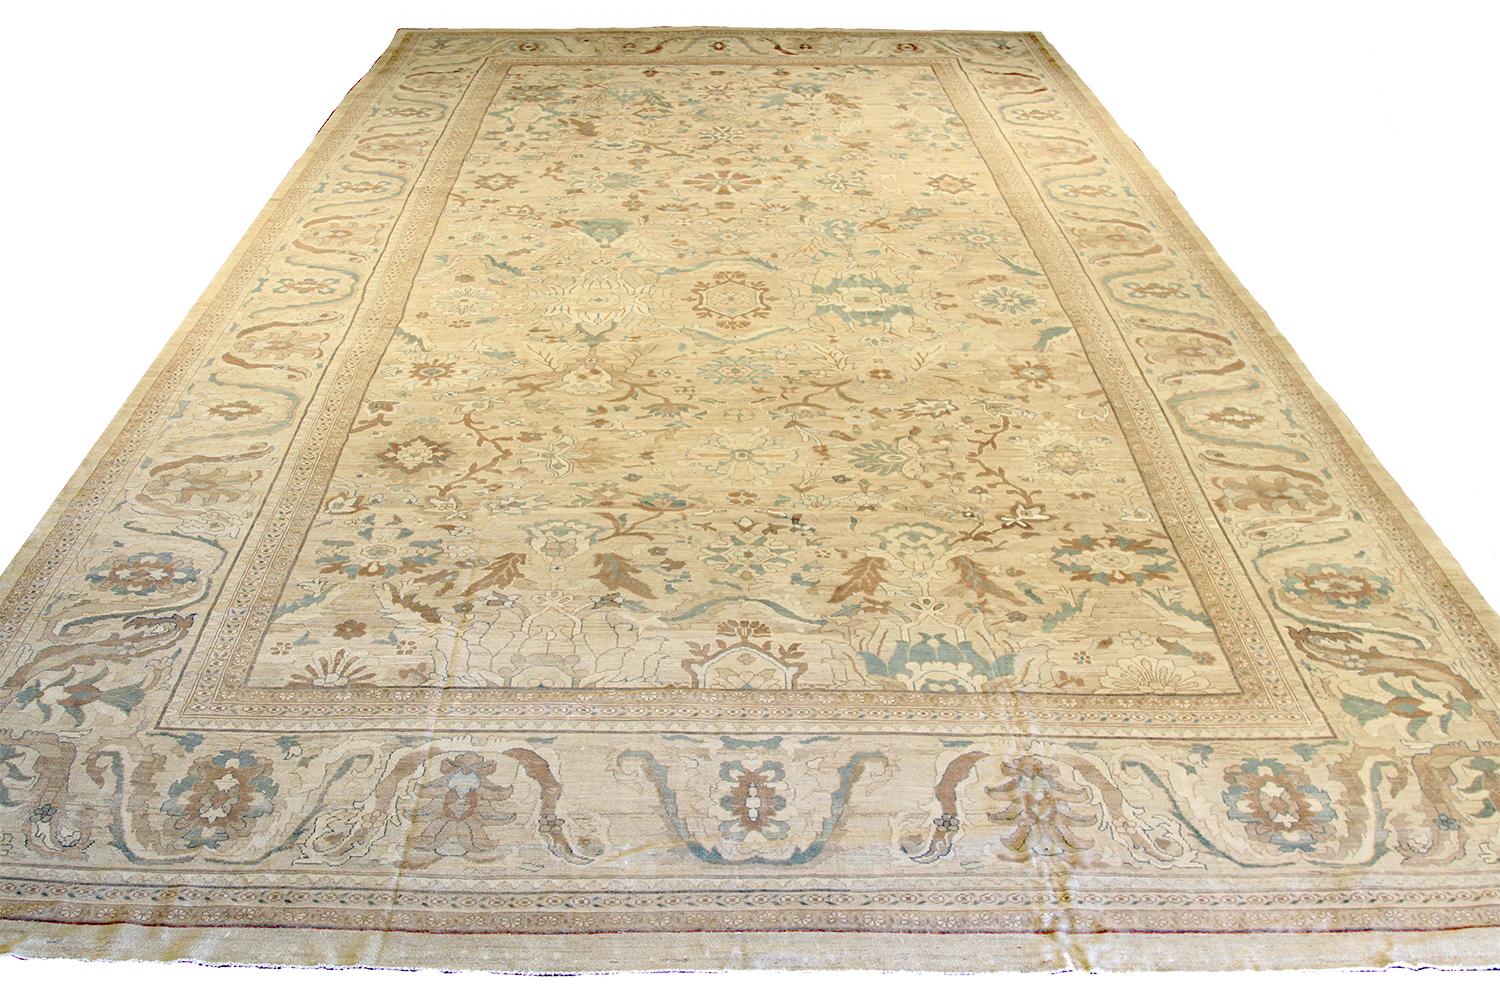 Oversize handmade Persian area rug from high-quality sheep’s wool and colored with eco-friendly vegetable dyes that are proven safe for humans and pets alike. It’s a classic Sultanabad design showcasing a regal ivory field with prominent Herati